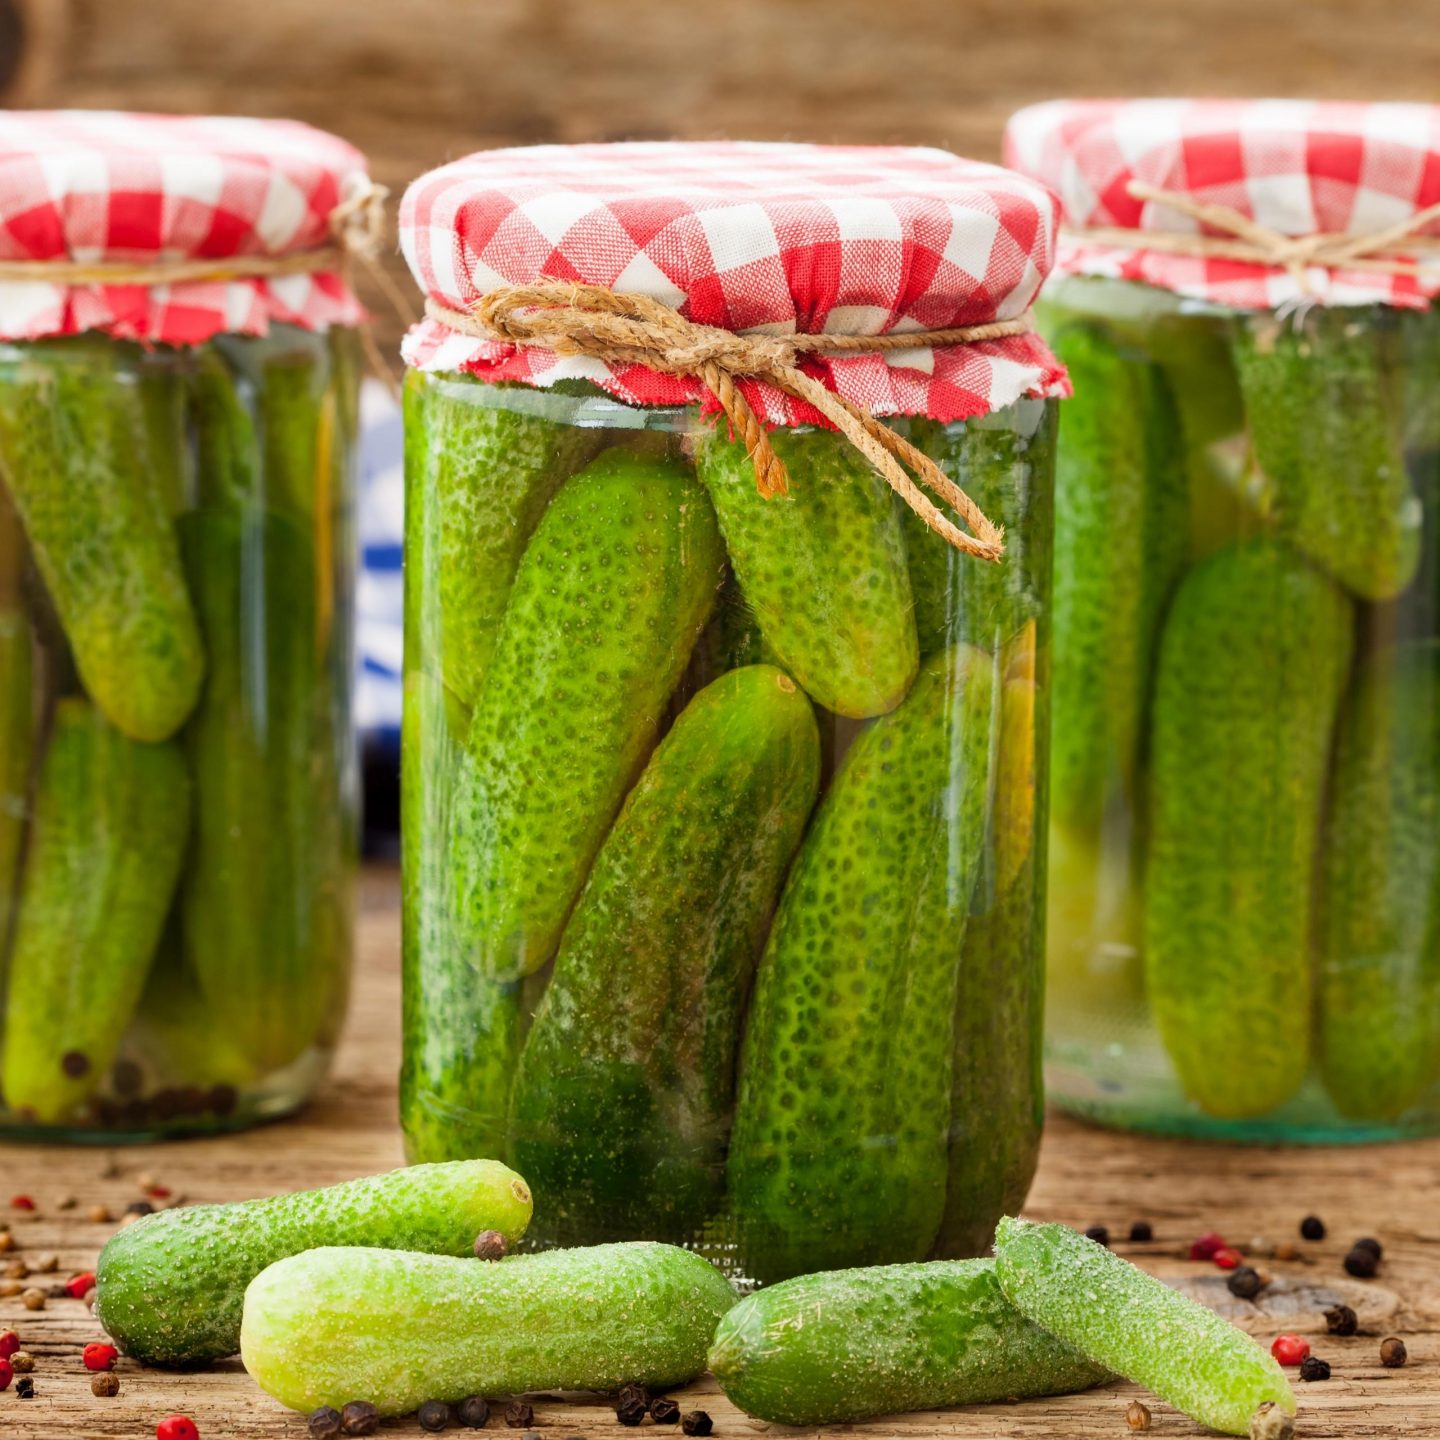 New canning jars with fresh garden cucumbers